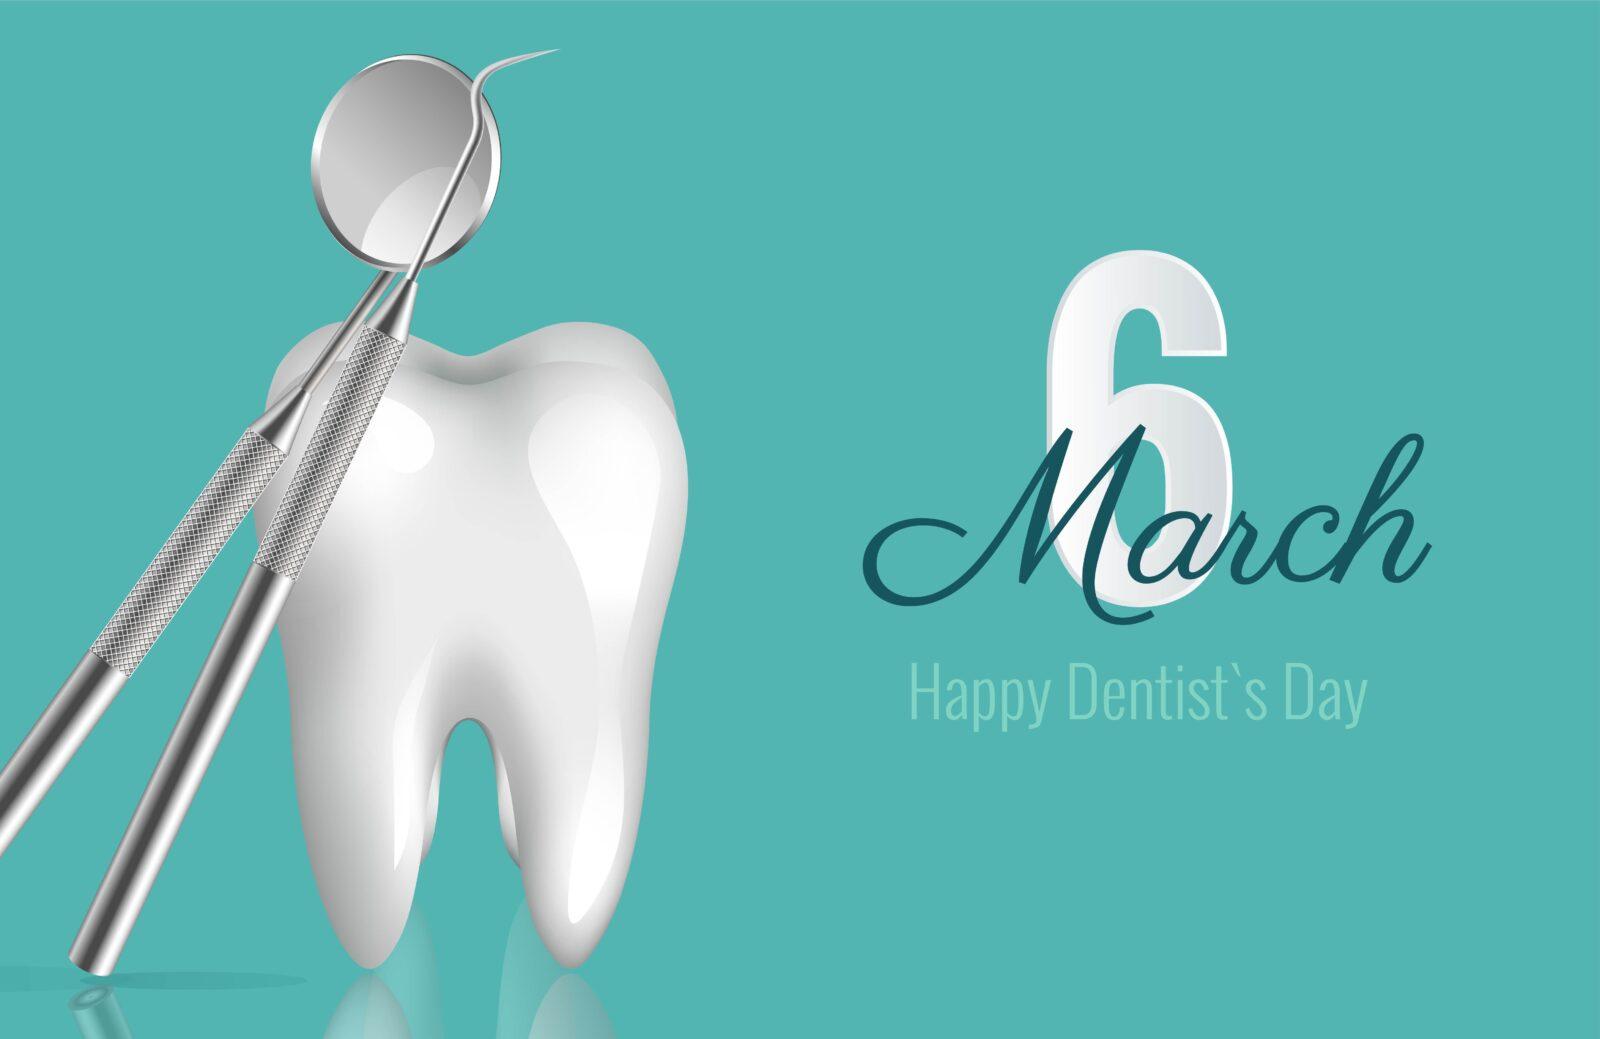 National Dentists’ Day- March 6th